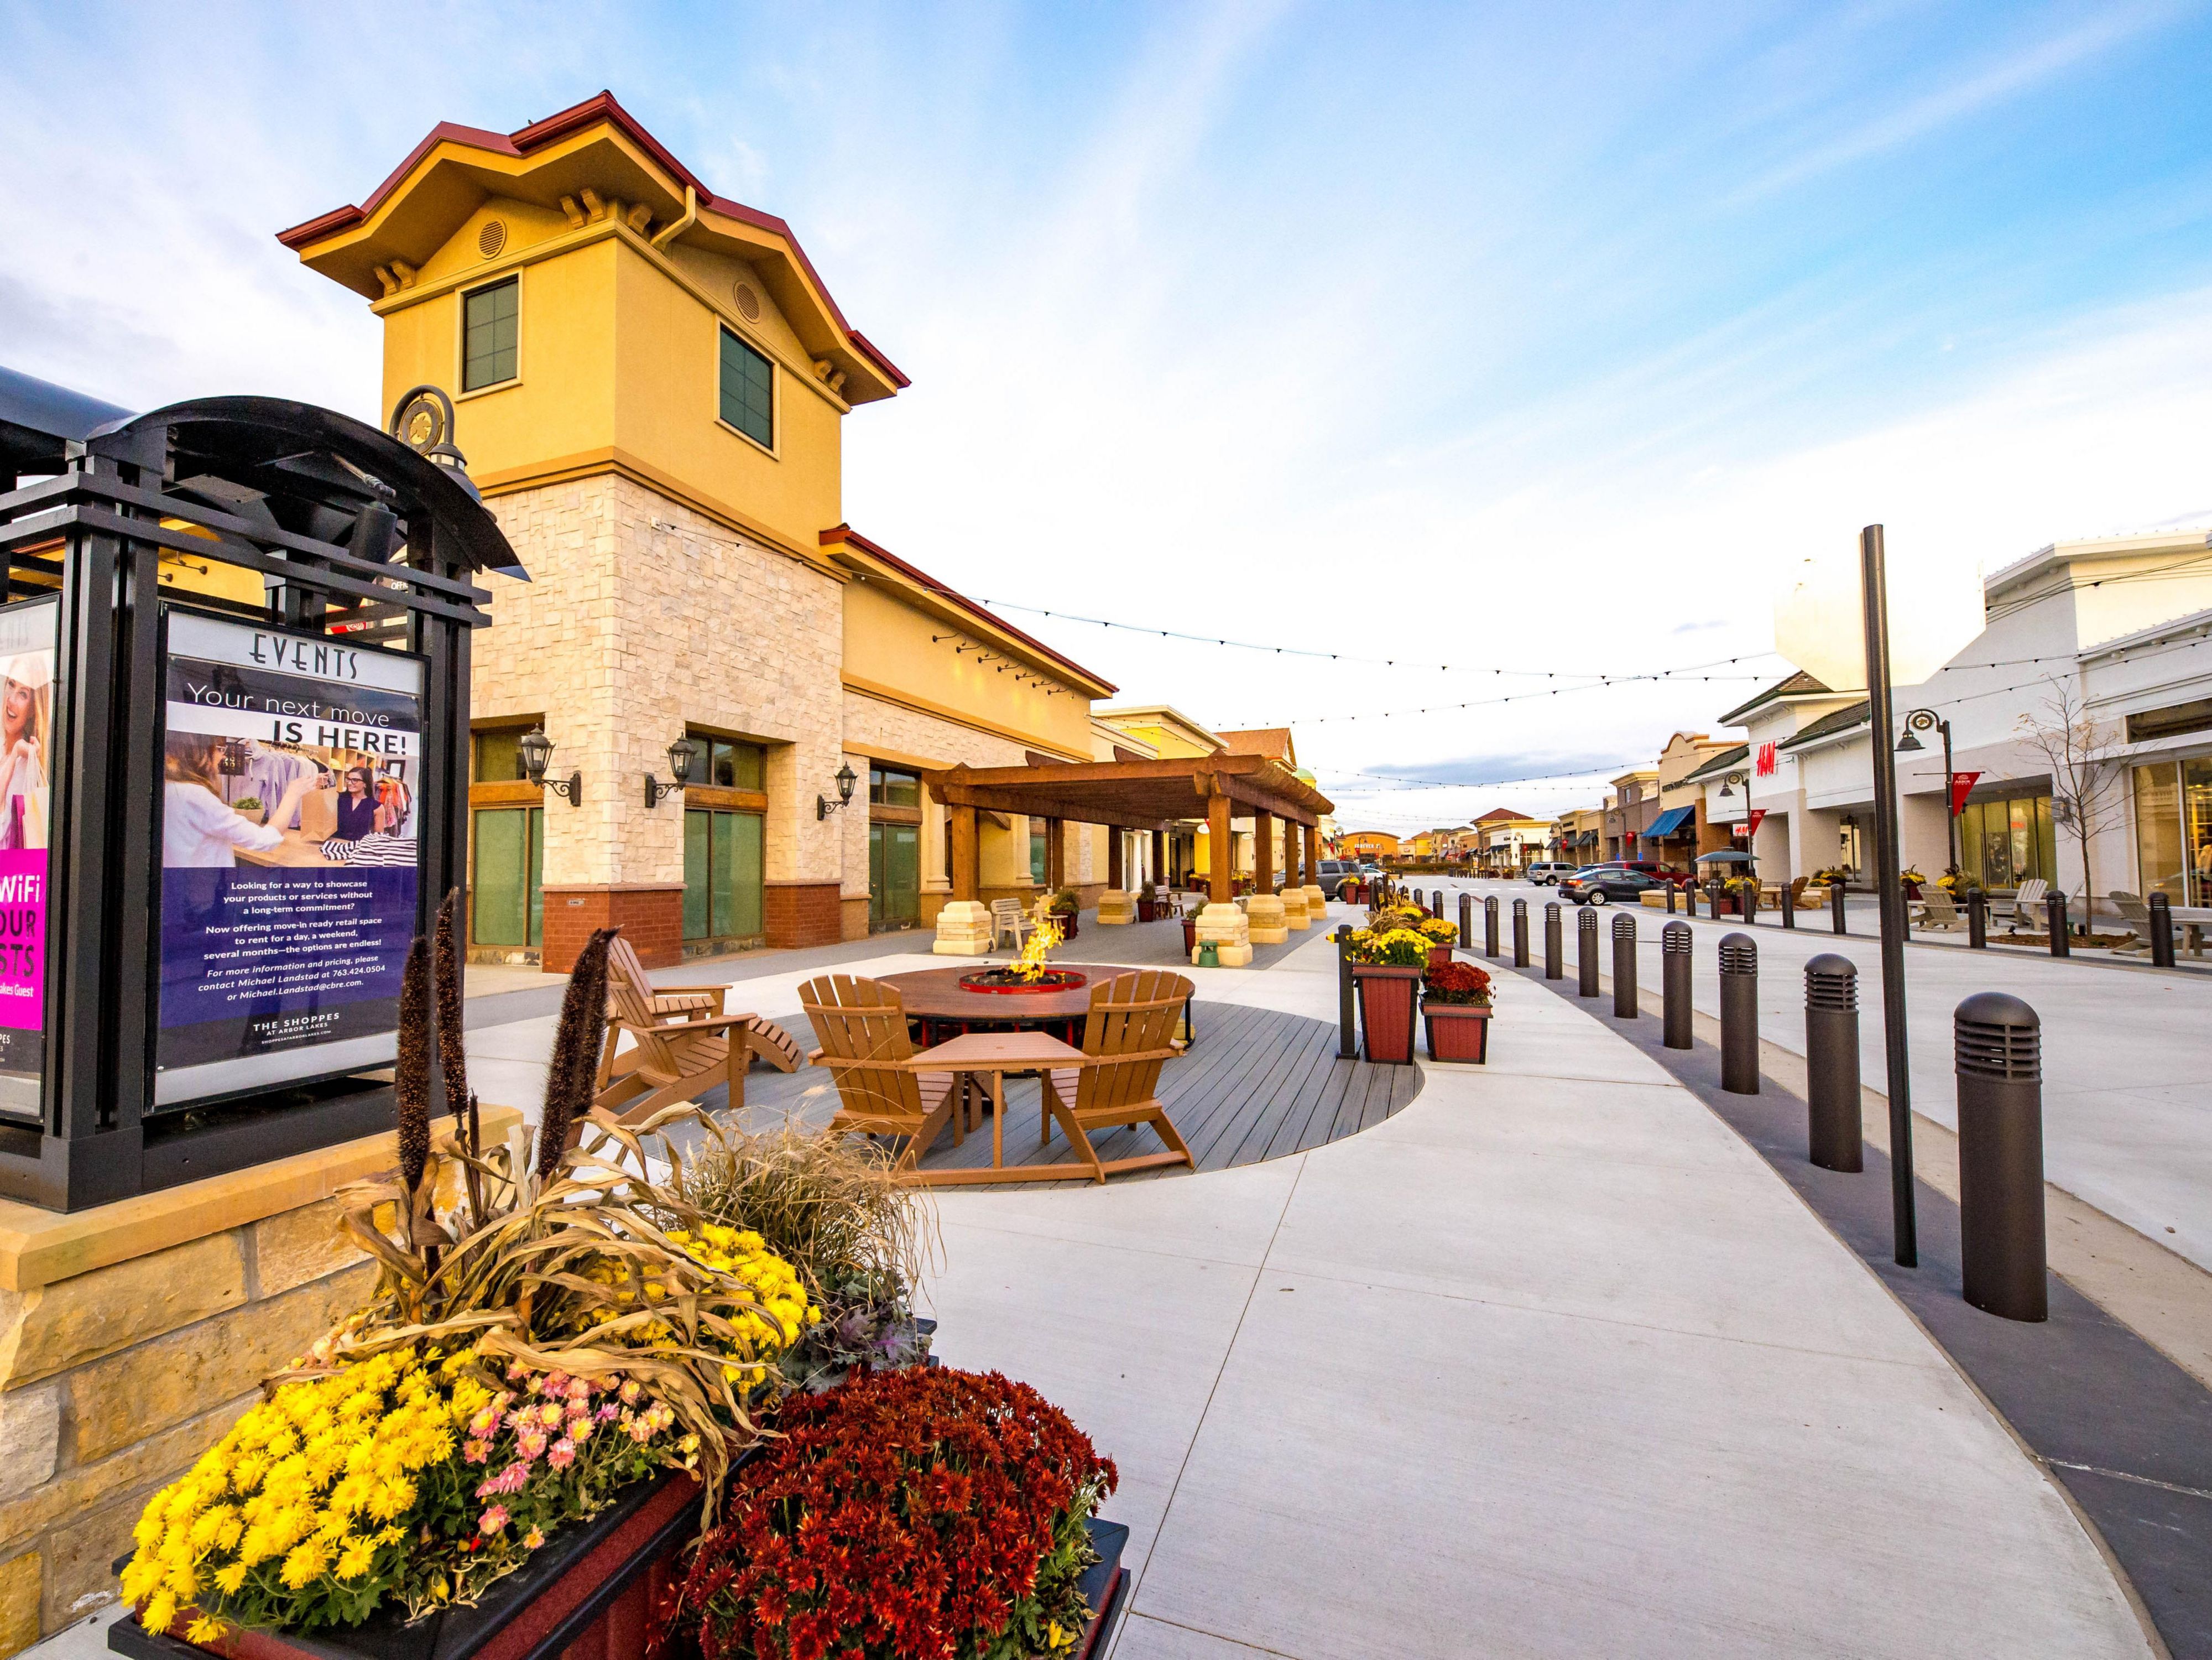 Just steps away from the hotel, you'll have plenty of shops to shop till you drop! With over 200 stores, dining and entertainment options to do right in Arbor Lakes, it's the perfect place to unwind!